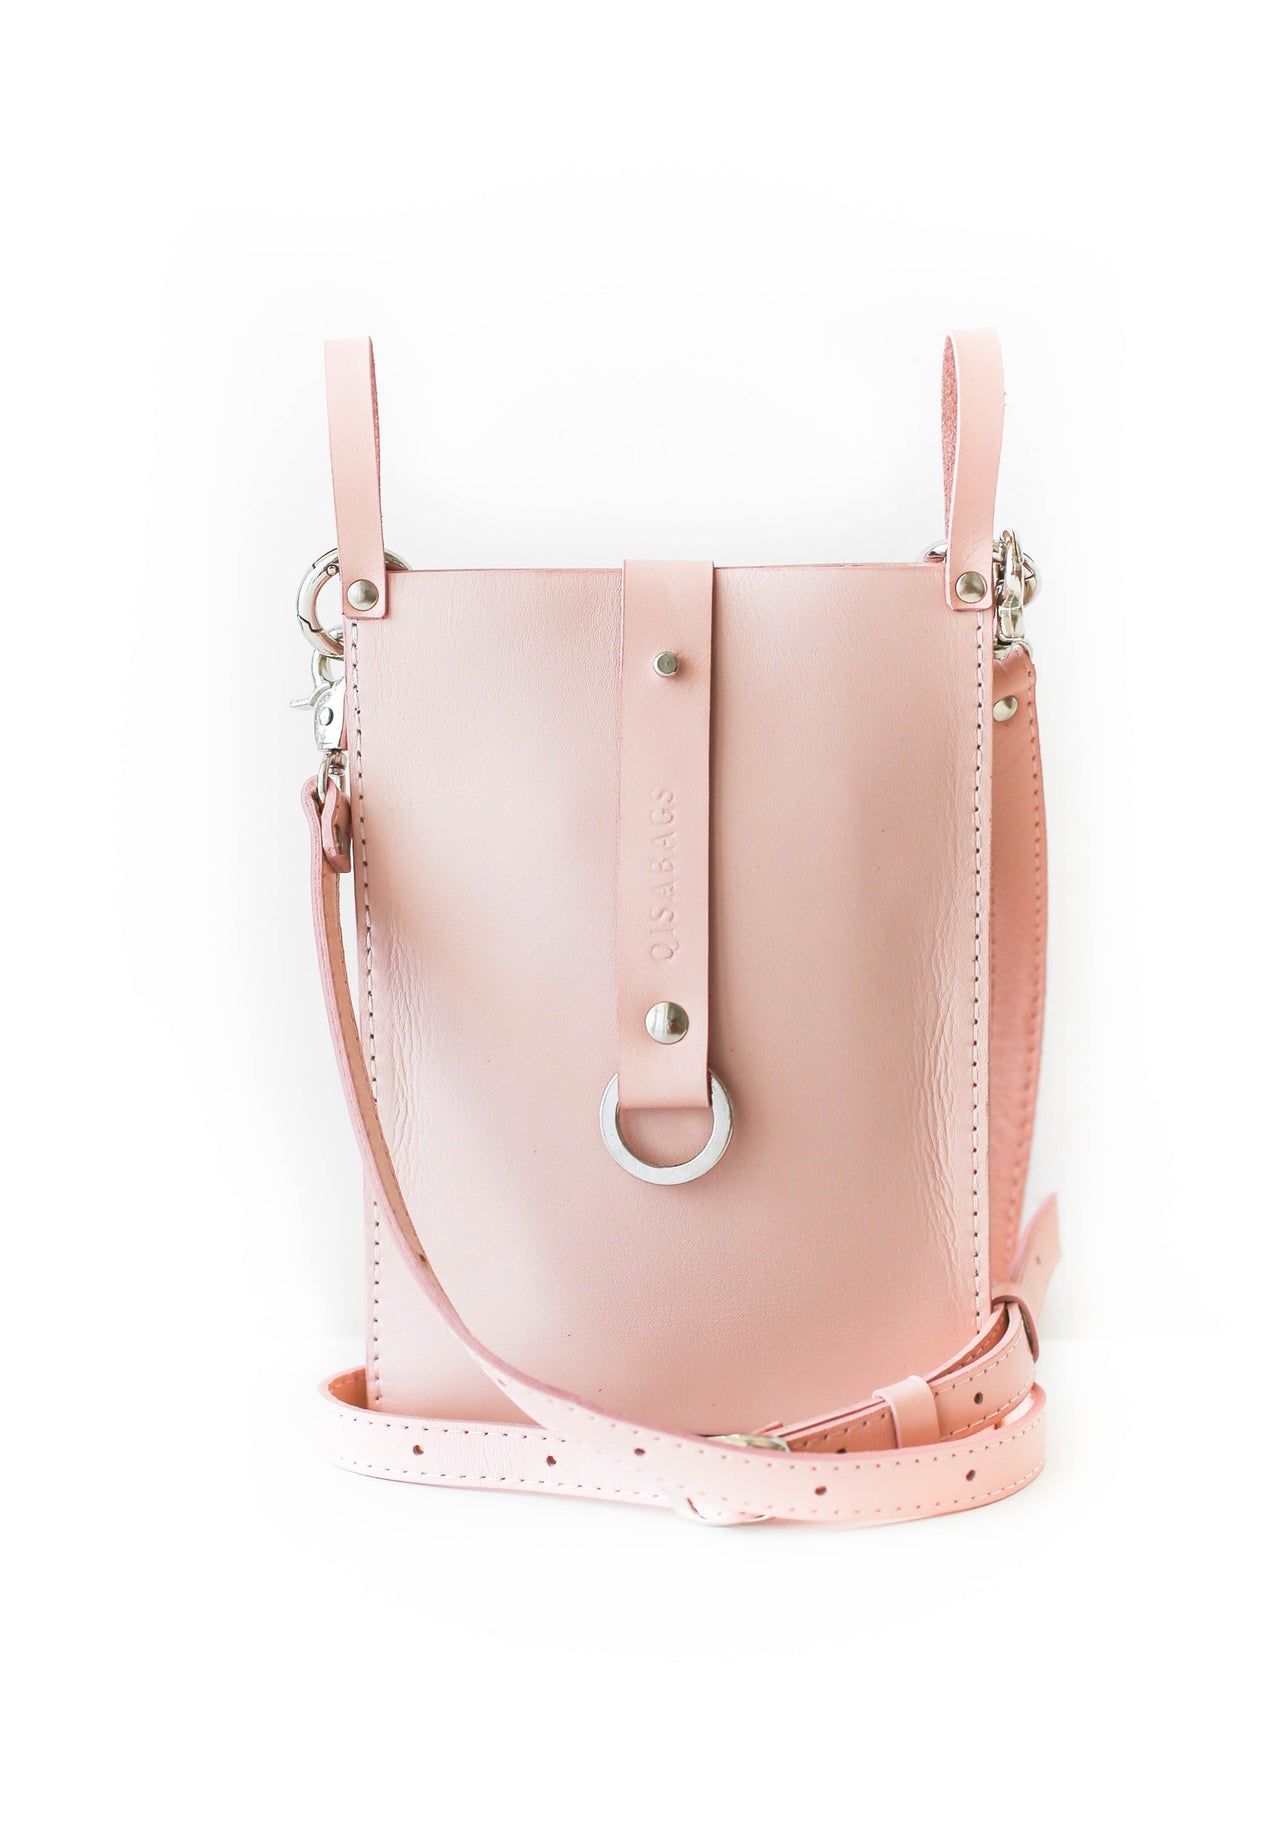 leather cross body phone bags for women